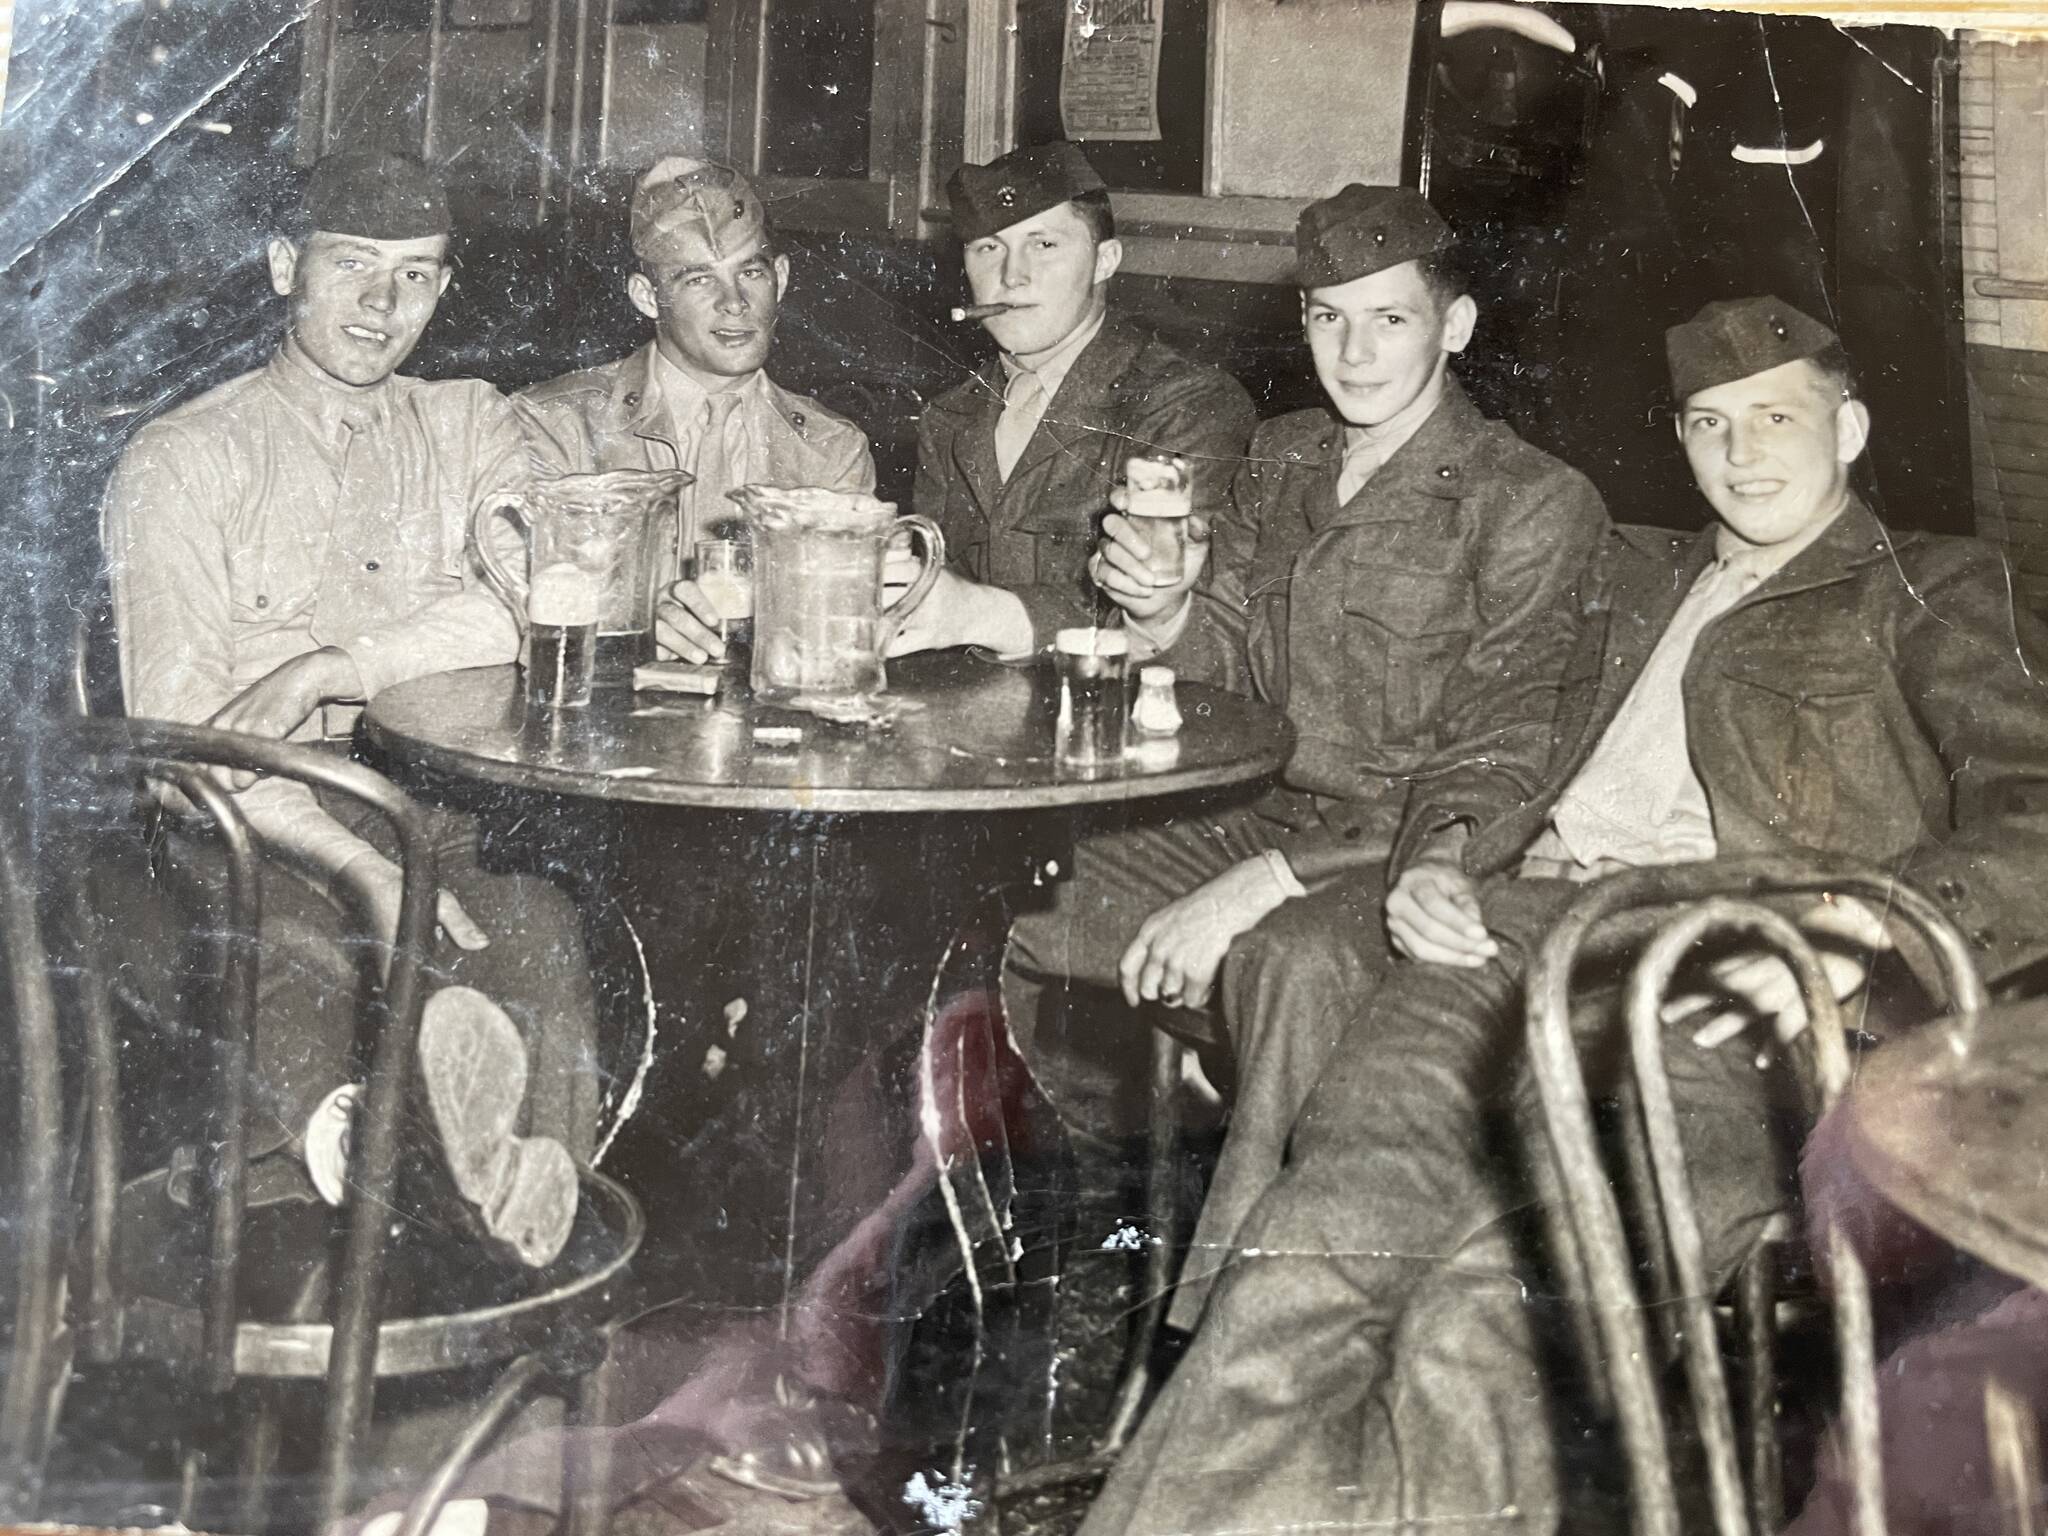 Irv Stephens, at far right, and other Marines relax on leave in Mexico prior to their deployment to Korea in the Korean War. (Courtesy photo / Irv Stephens)